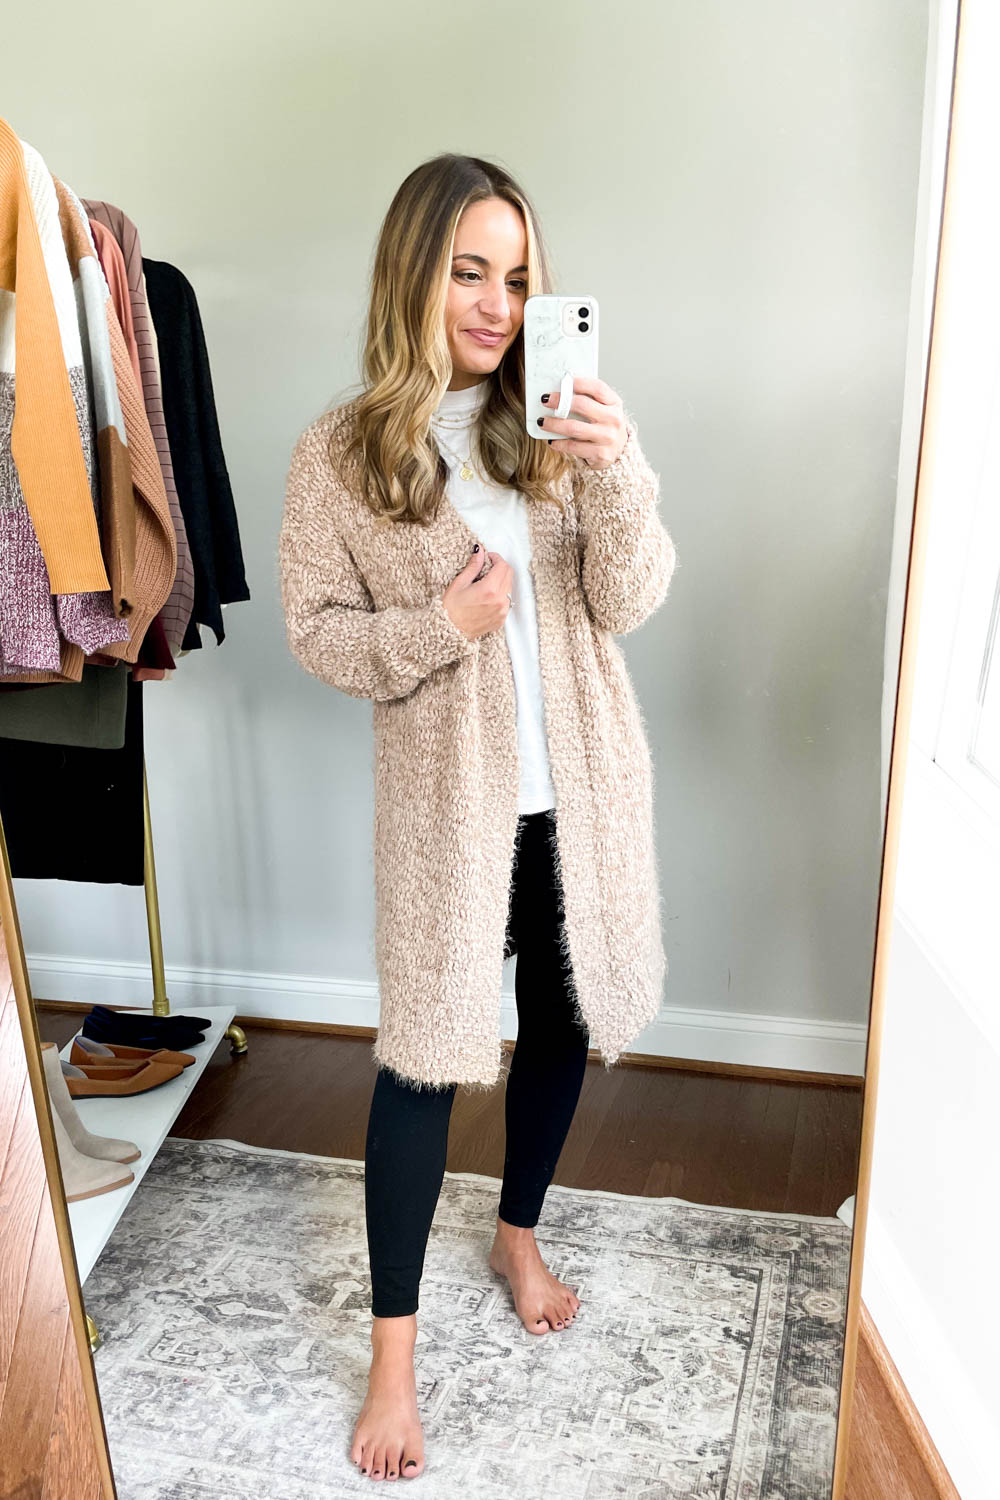 Cozy cardigan to wear at home via pumps and push-ups blog | petite style | fall fashion 